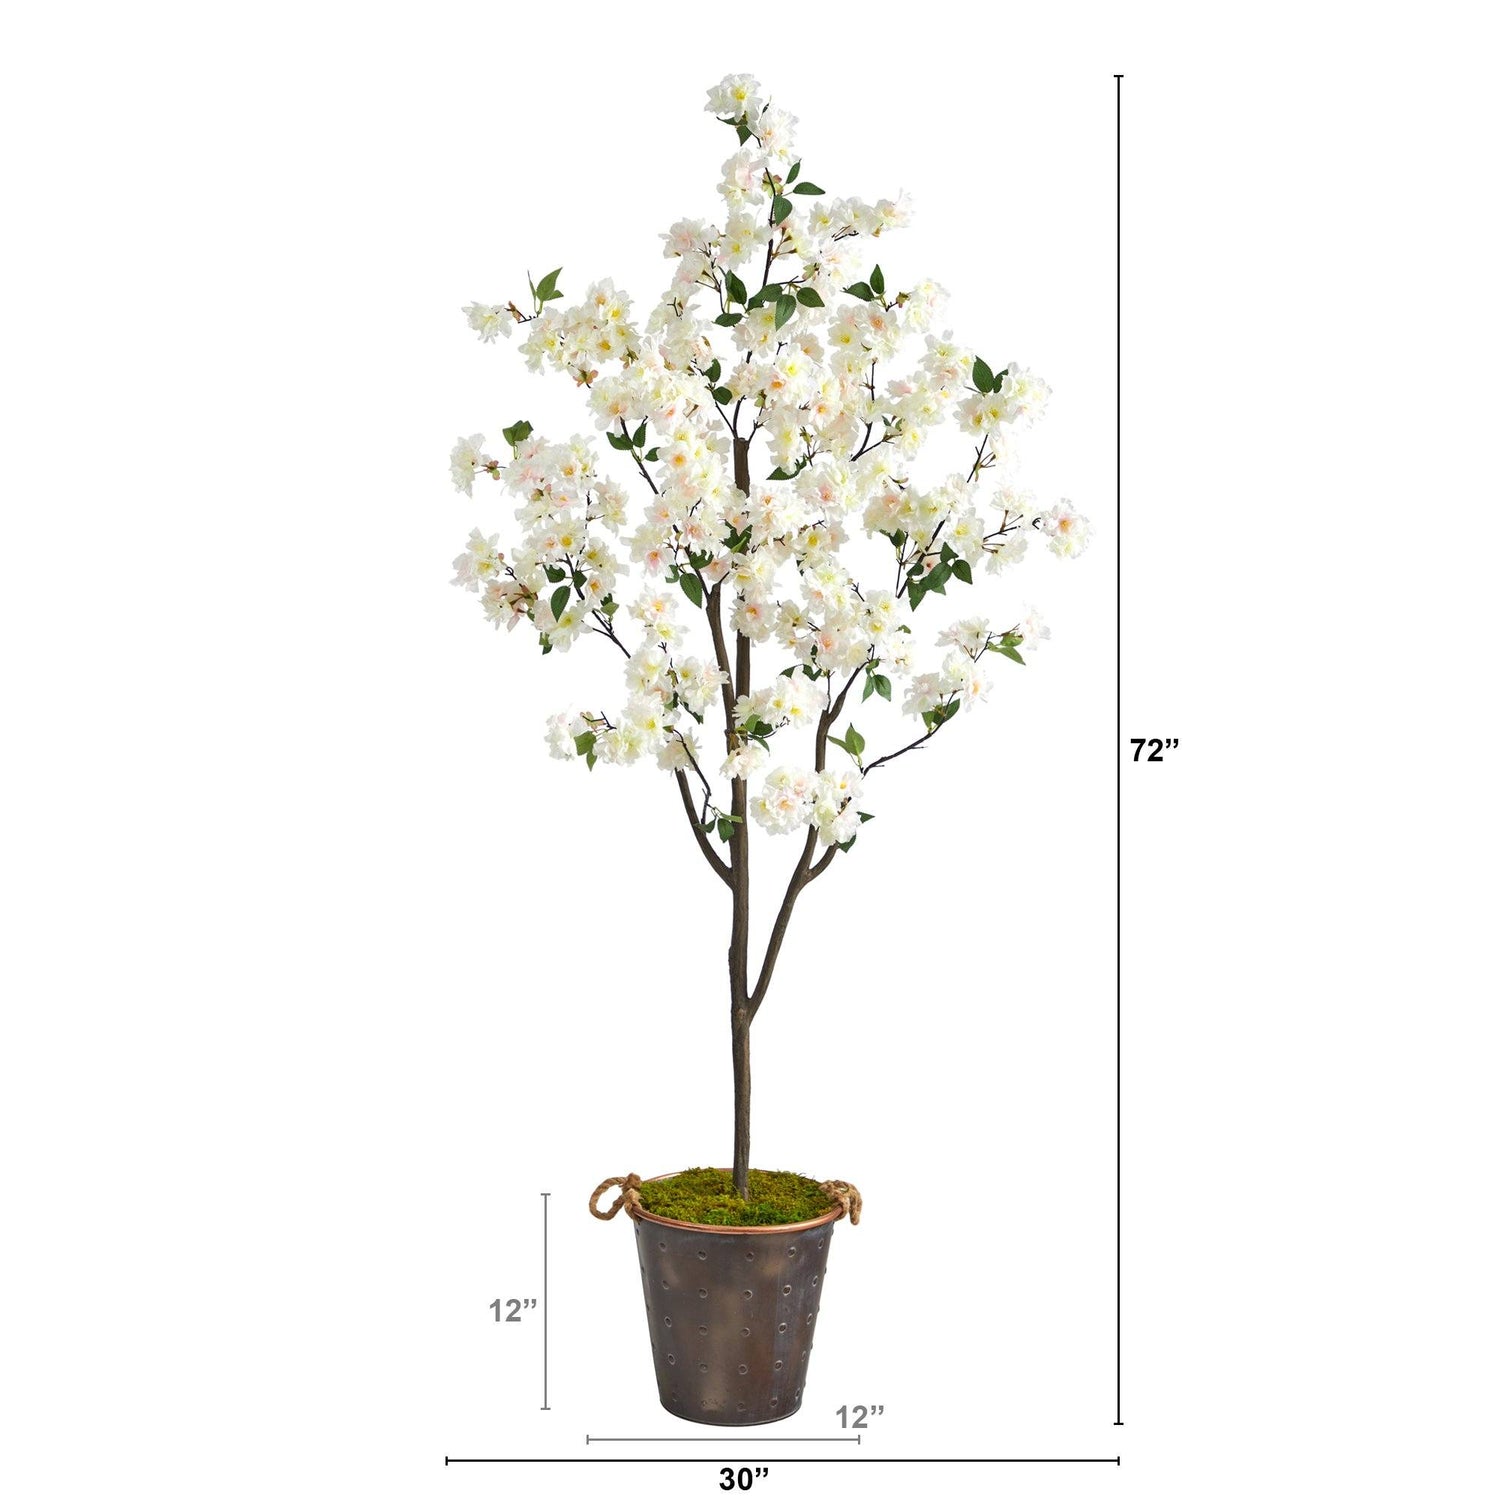 6’ Cherry Blossom Artificial Tree in Decorative Metal Pail with Rope